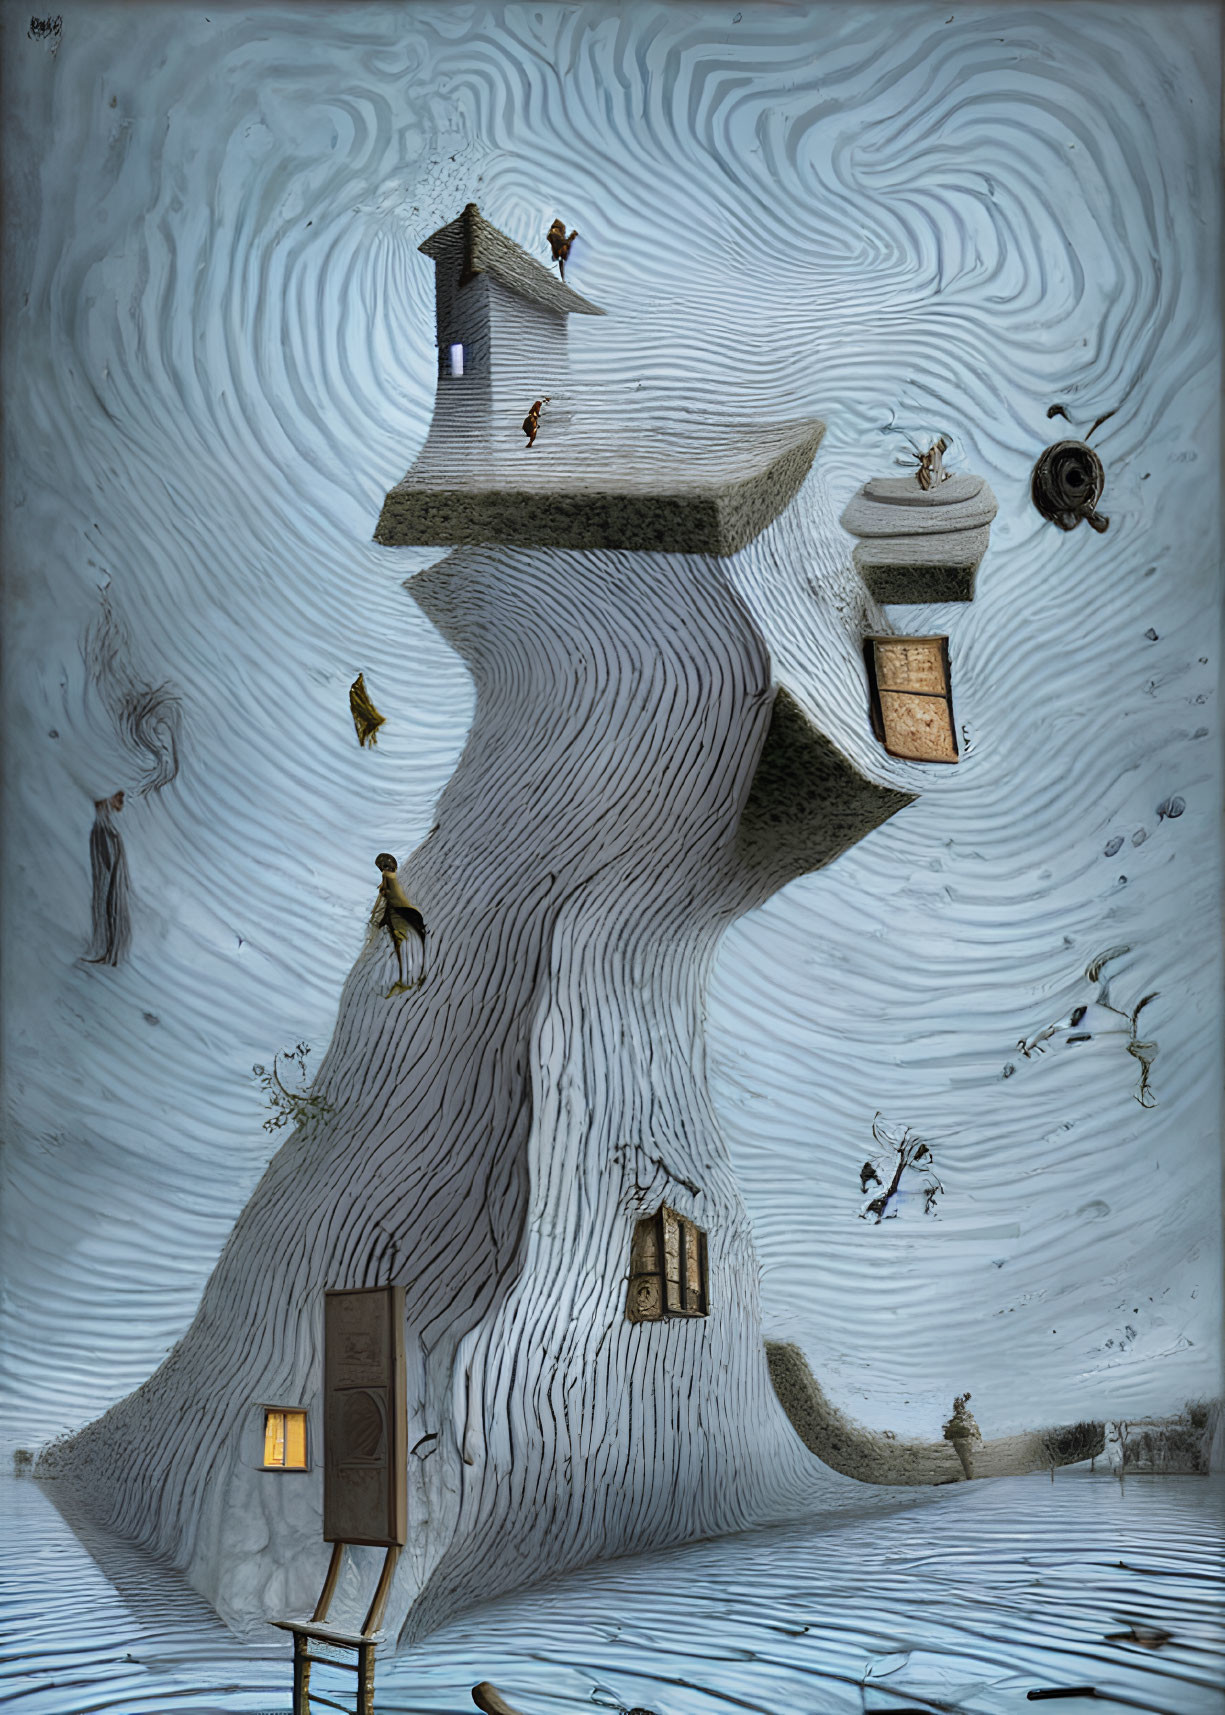 Surreal Tree Structure with Door, Windows, and House, Surrounded by Floating Figures